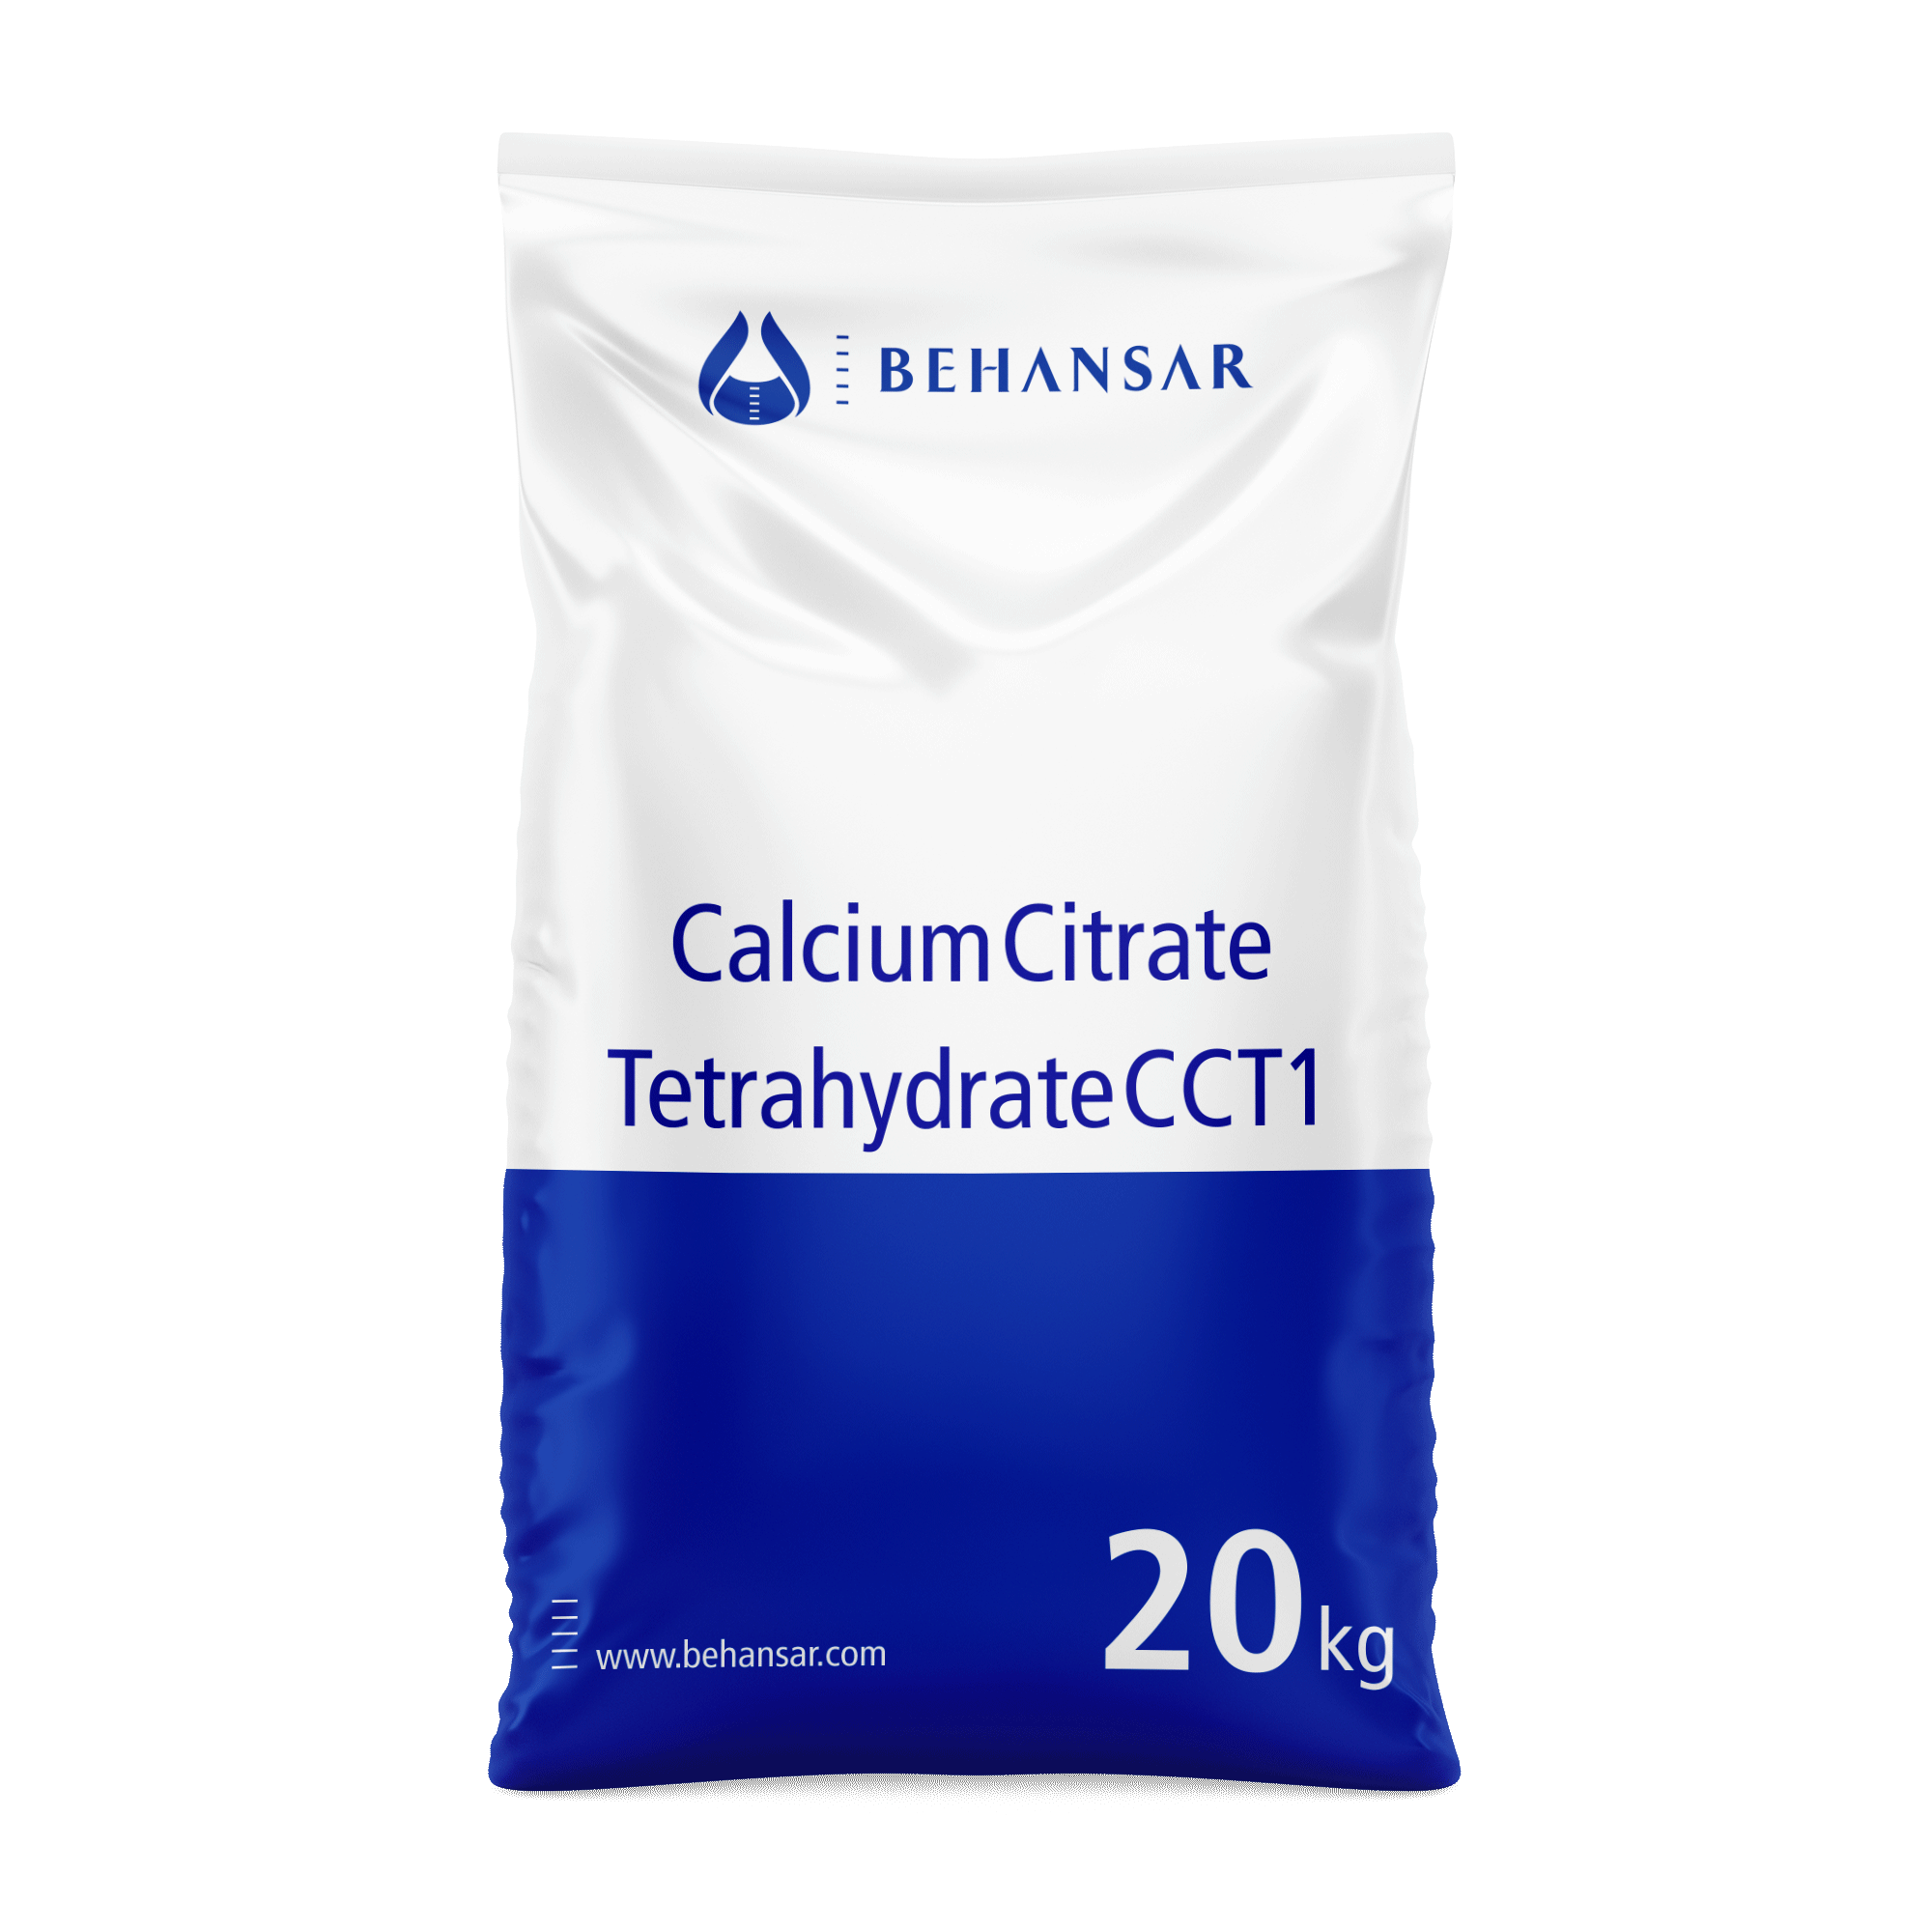 Calcium Citrate Tetrahydrate CCT1 is one of the products of Behansar Co